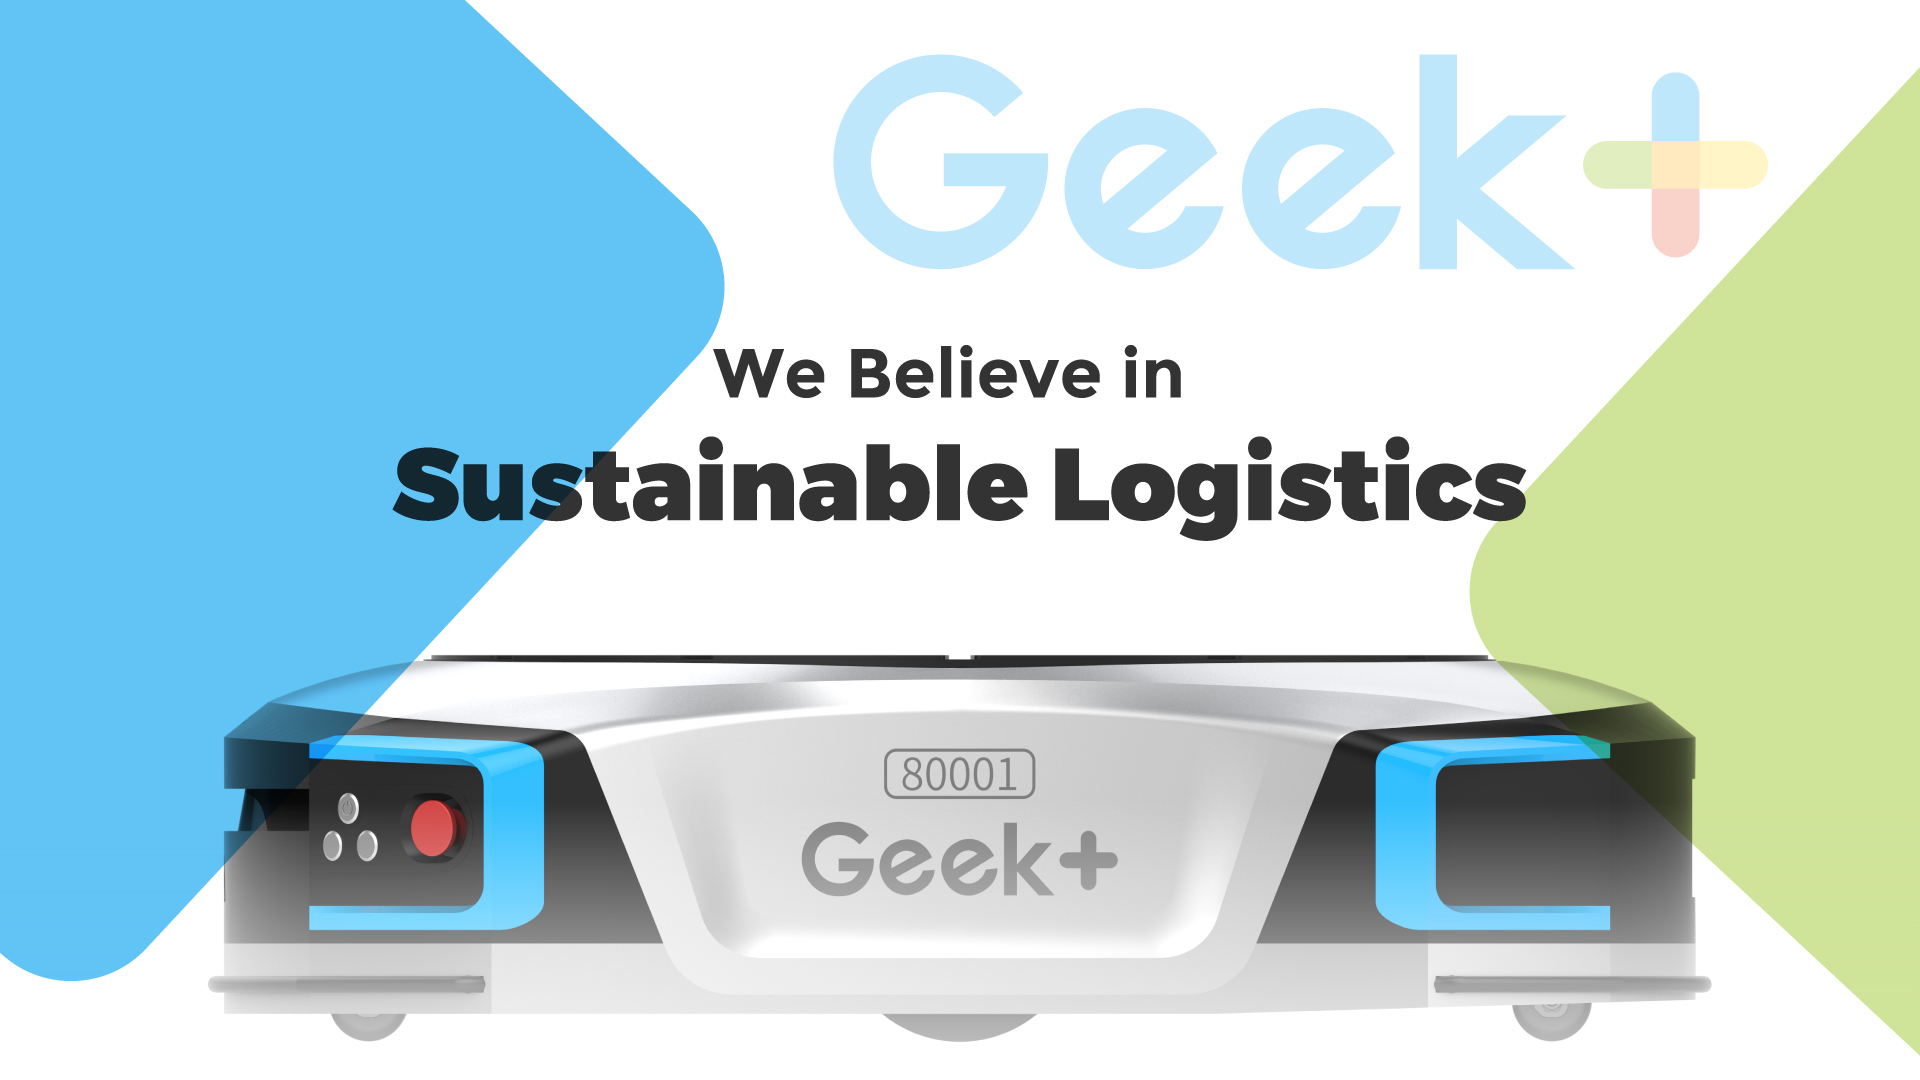 Geek+ solutions saved 140,000 tons of carbon emissions in 2022, supporting sustainable logistics